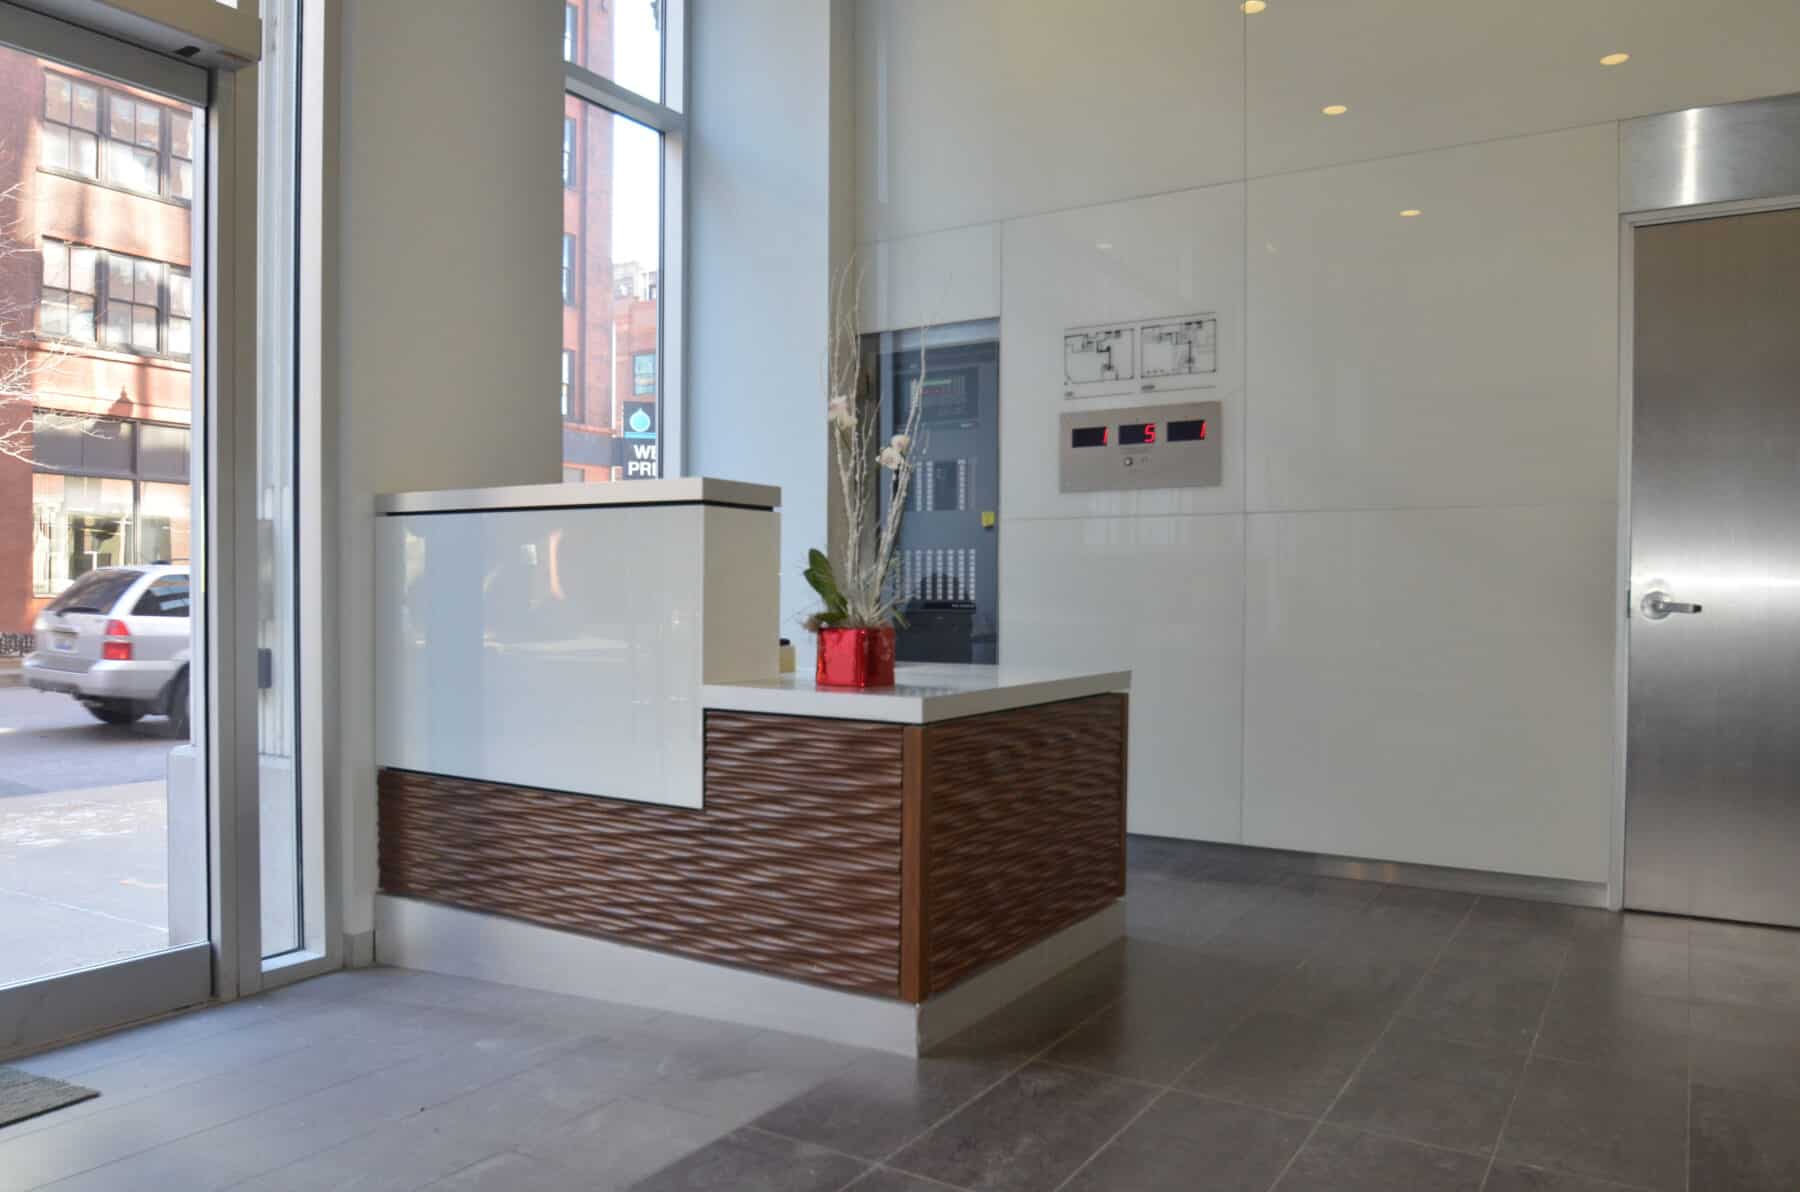 Custom Reception Desk and Glass Wall Panels for Randolph Street Lobby remodel by Commercial Builder & General Contractor Structural Enterprises